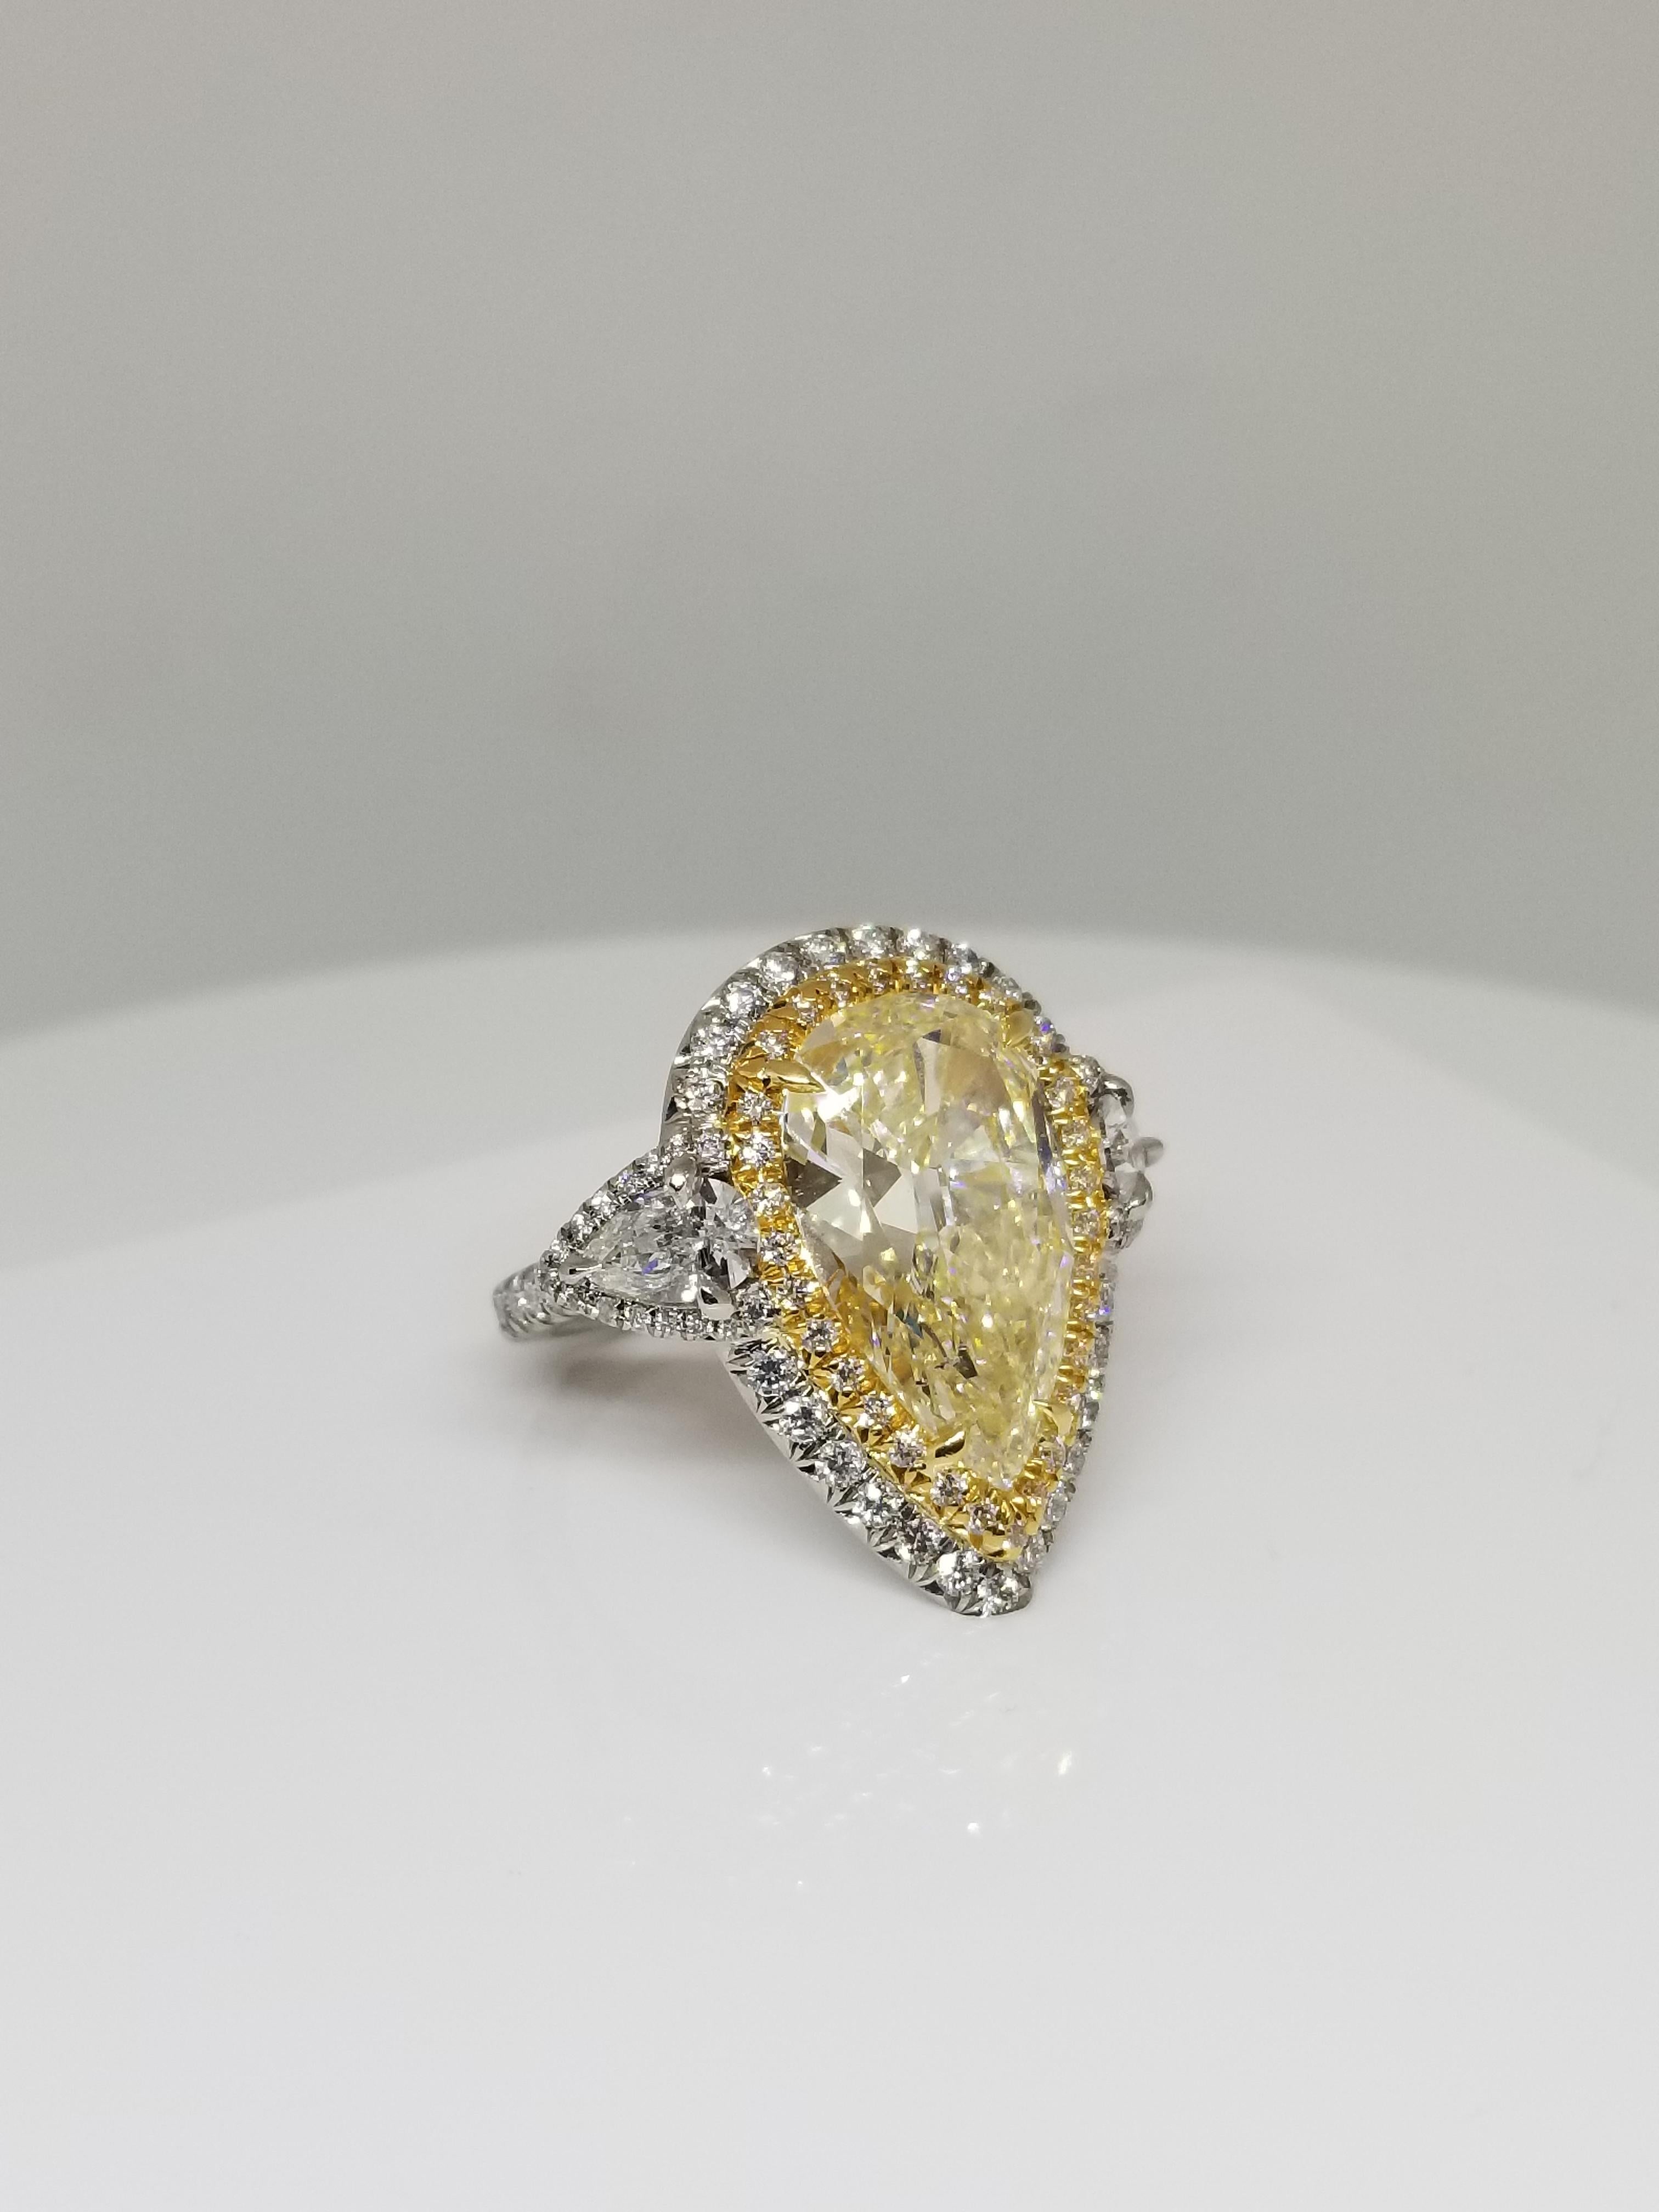 Natural pear shape diamond weighing 5.66 carats by GIA 1176817540. Ring in platinum and 18 karats yellow gold; 3 rows design with 2 side pear shape diamonds mounted in double halo. Its transparency and luster are excellent.